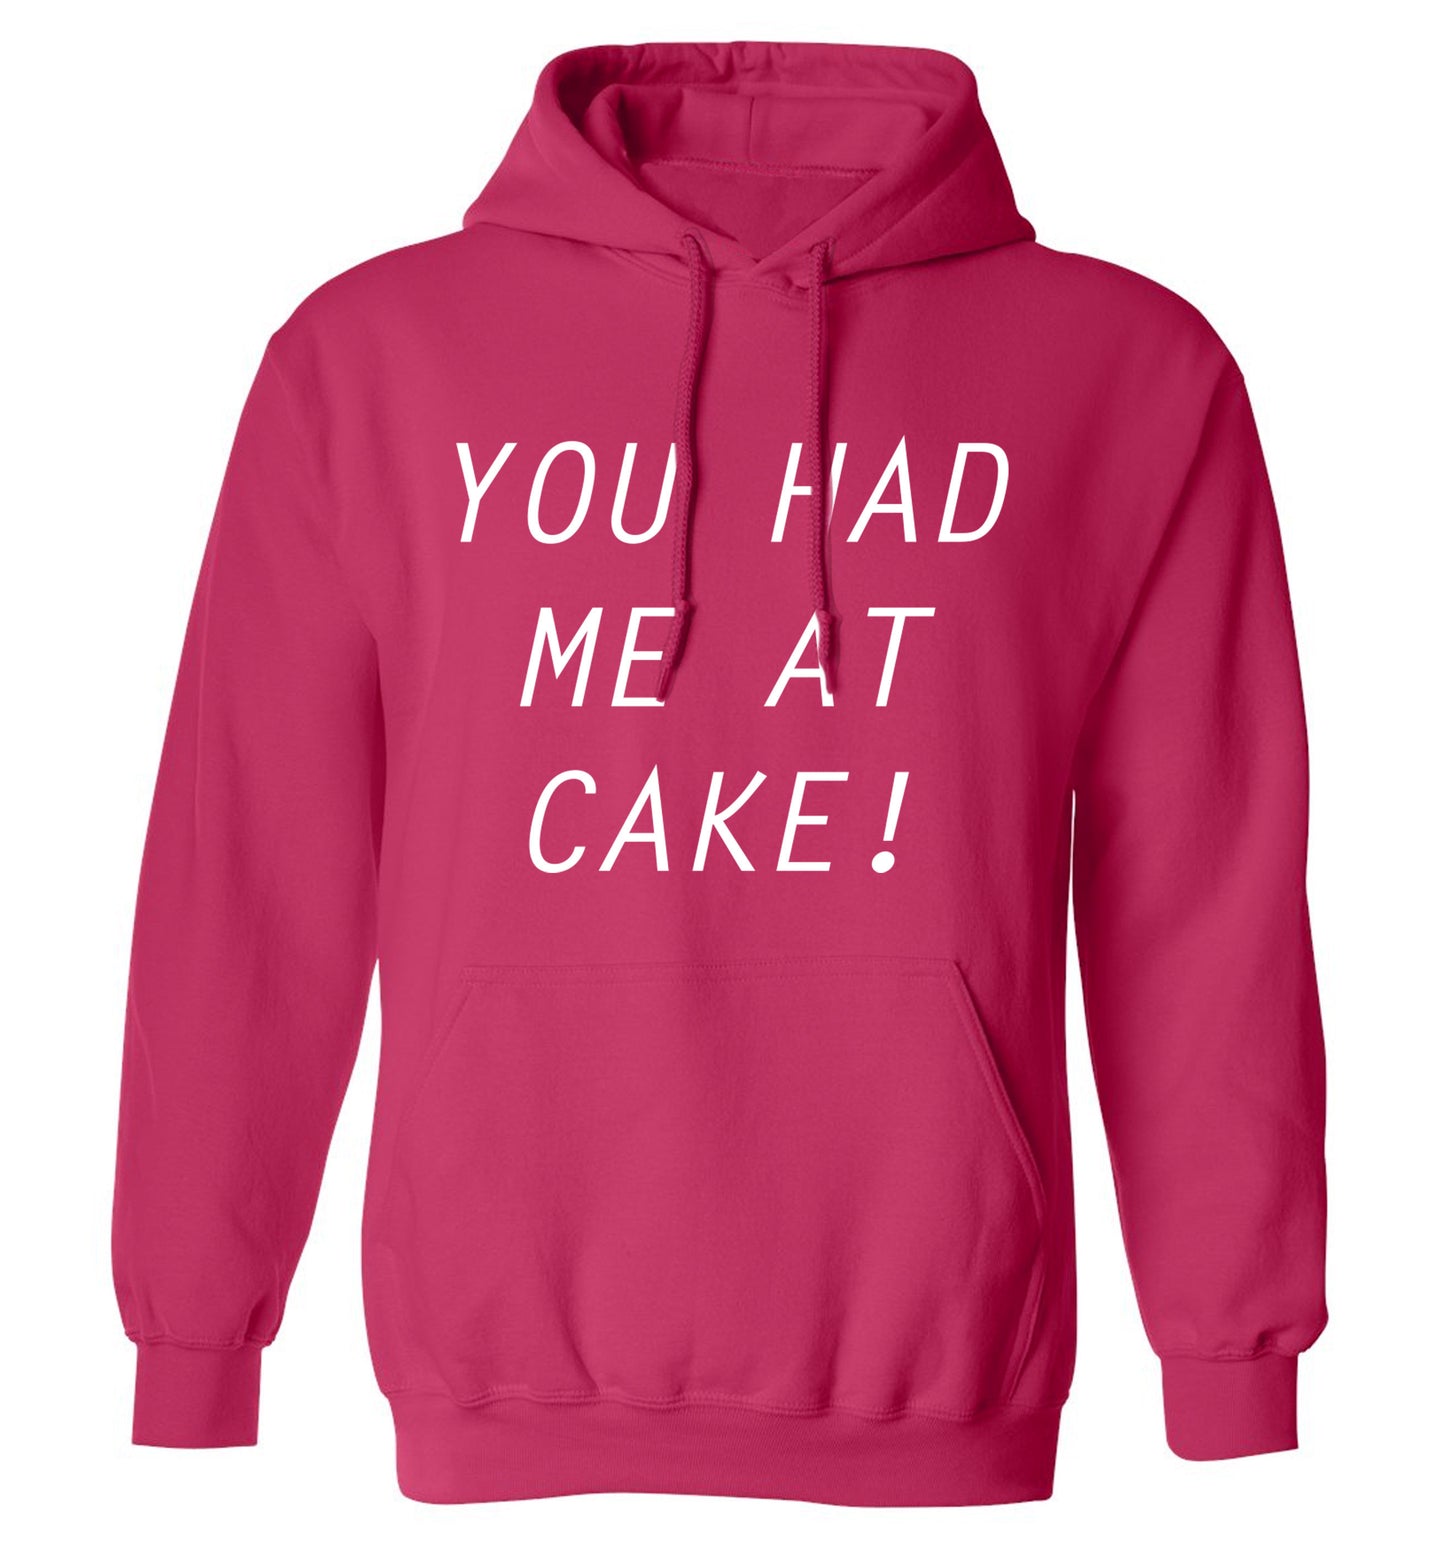 You had me at cake adults unisex pink hoodie 2XL